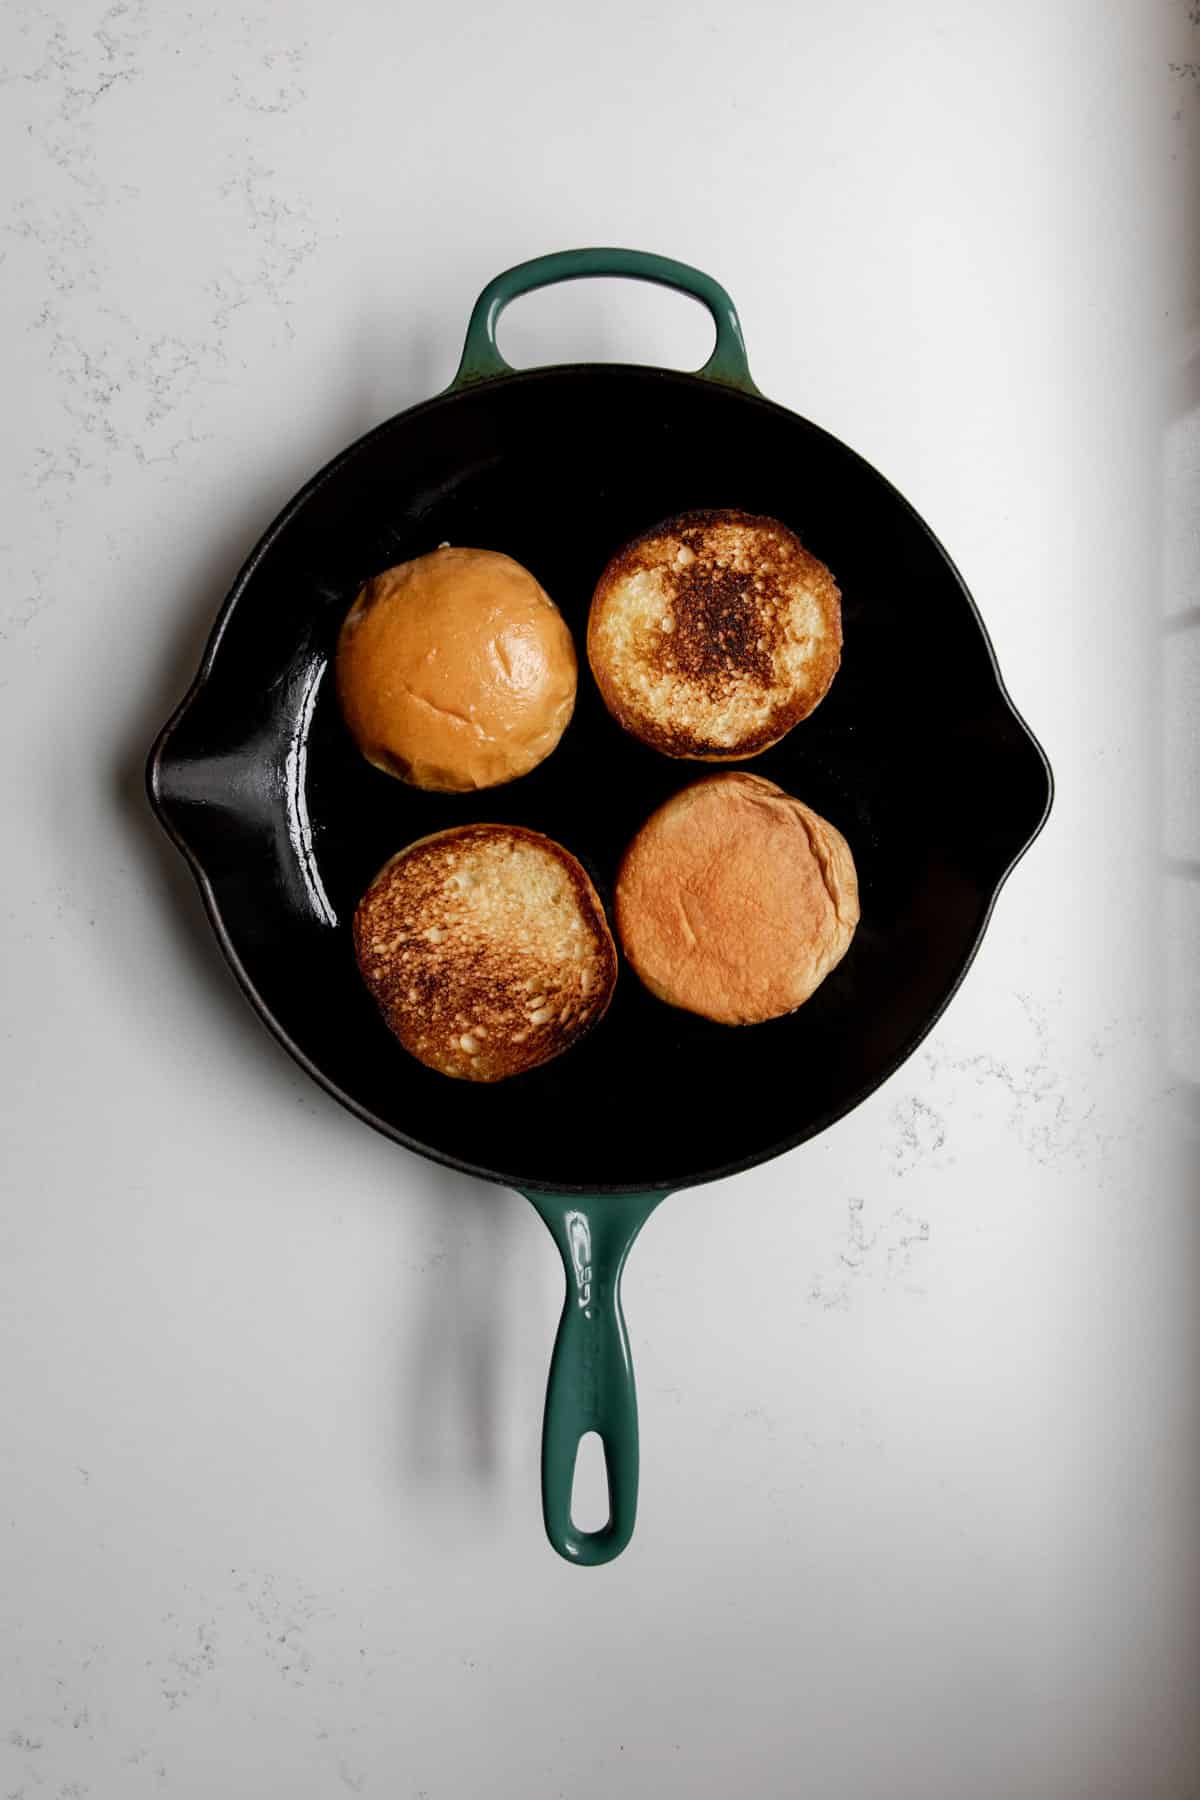 Four toasted brioche buns in a cast iron skillet.